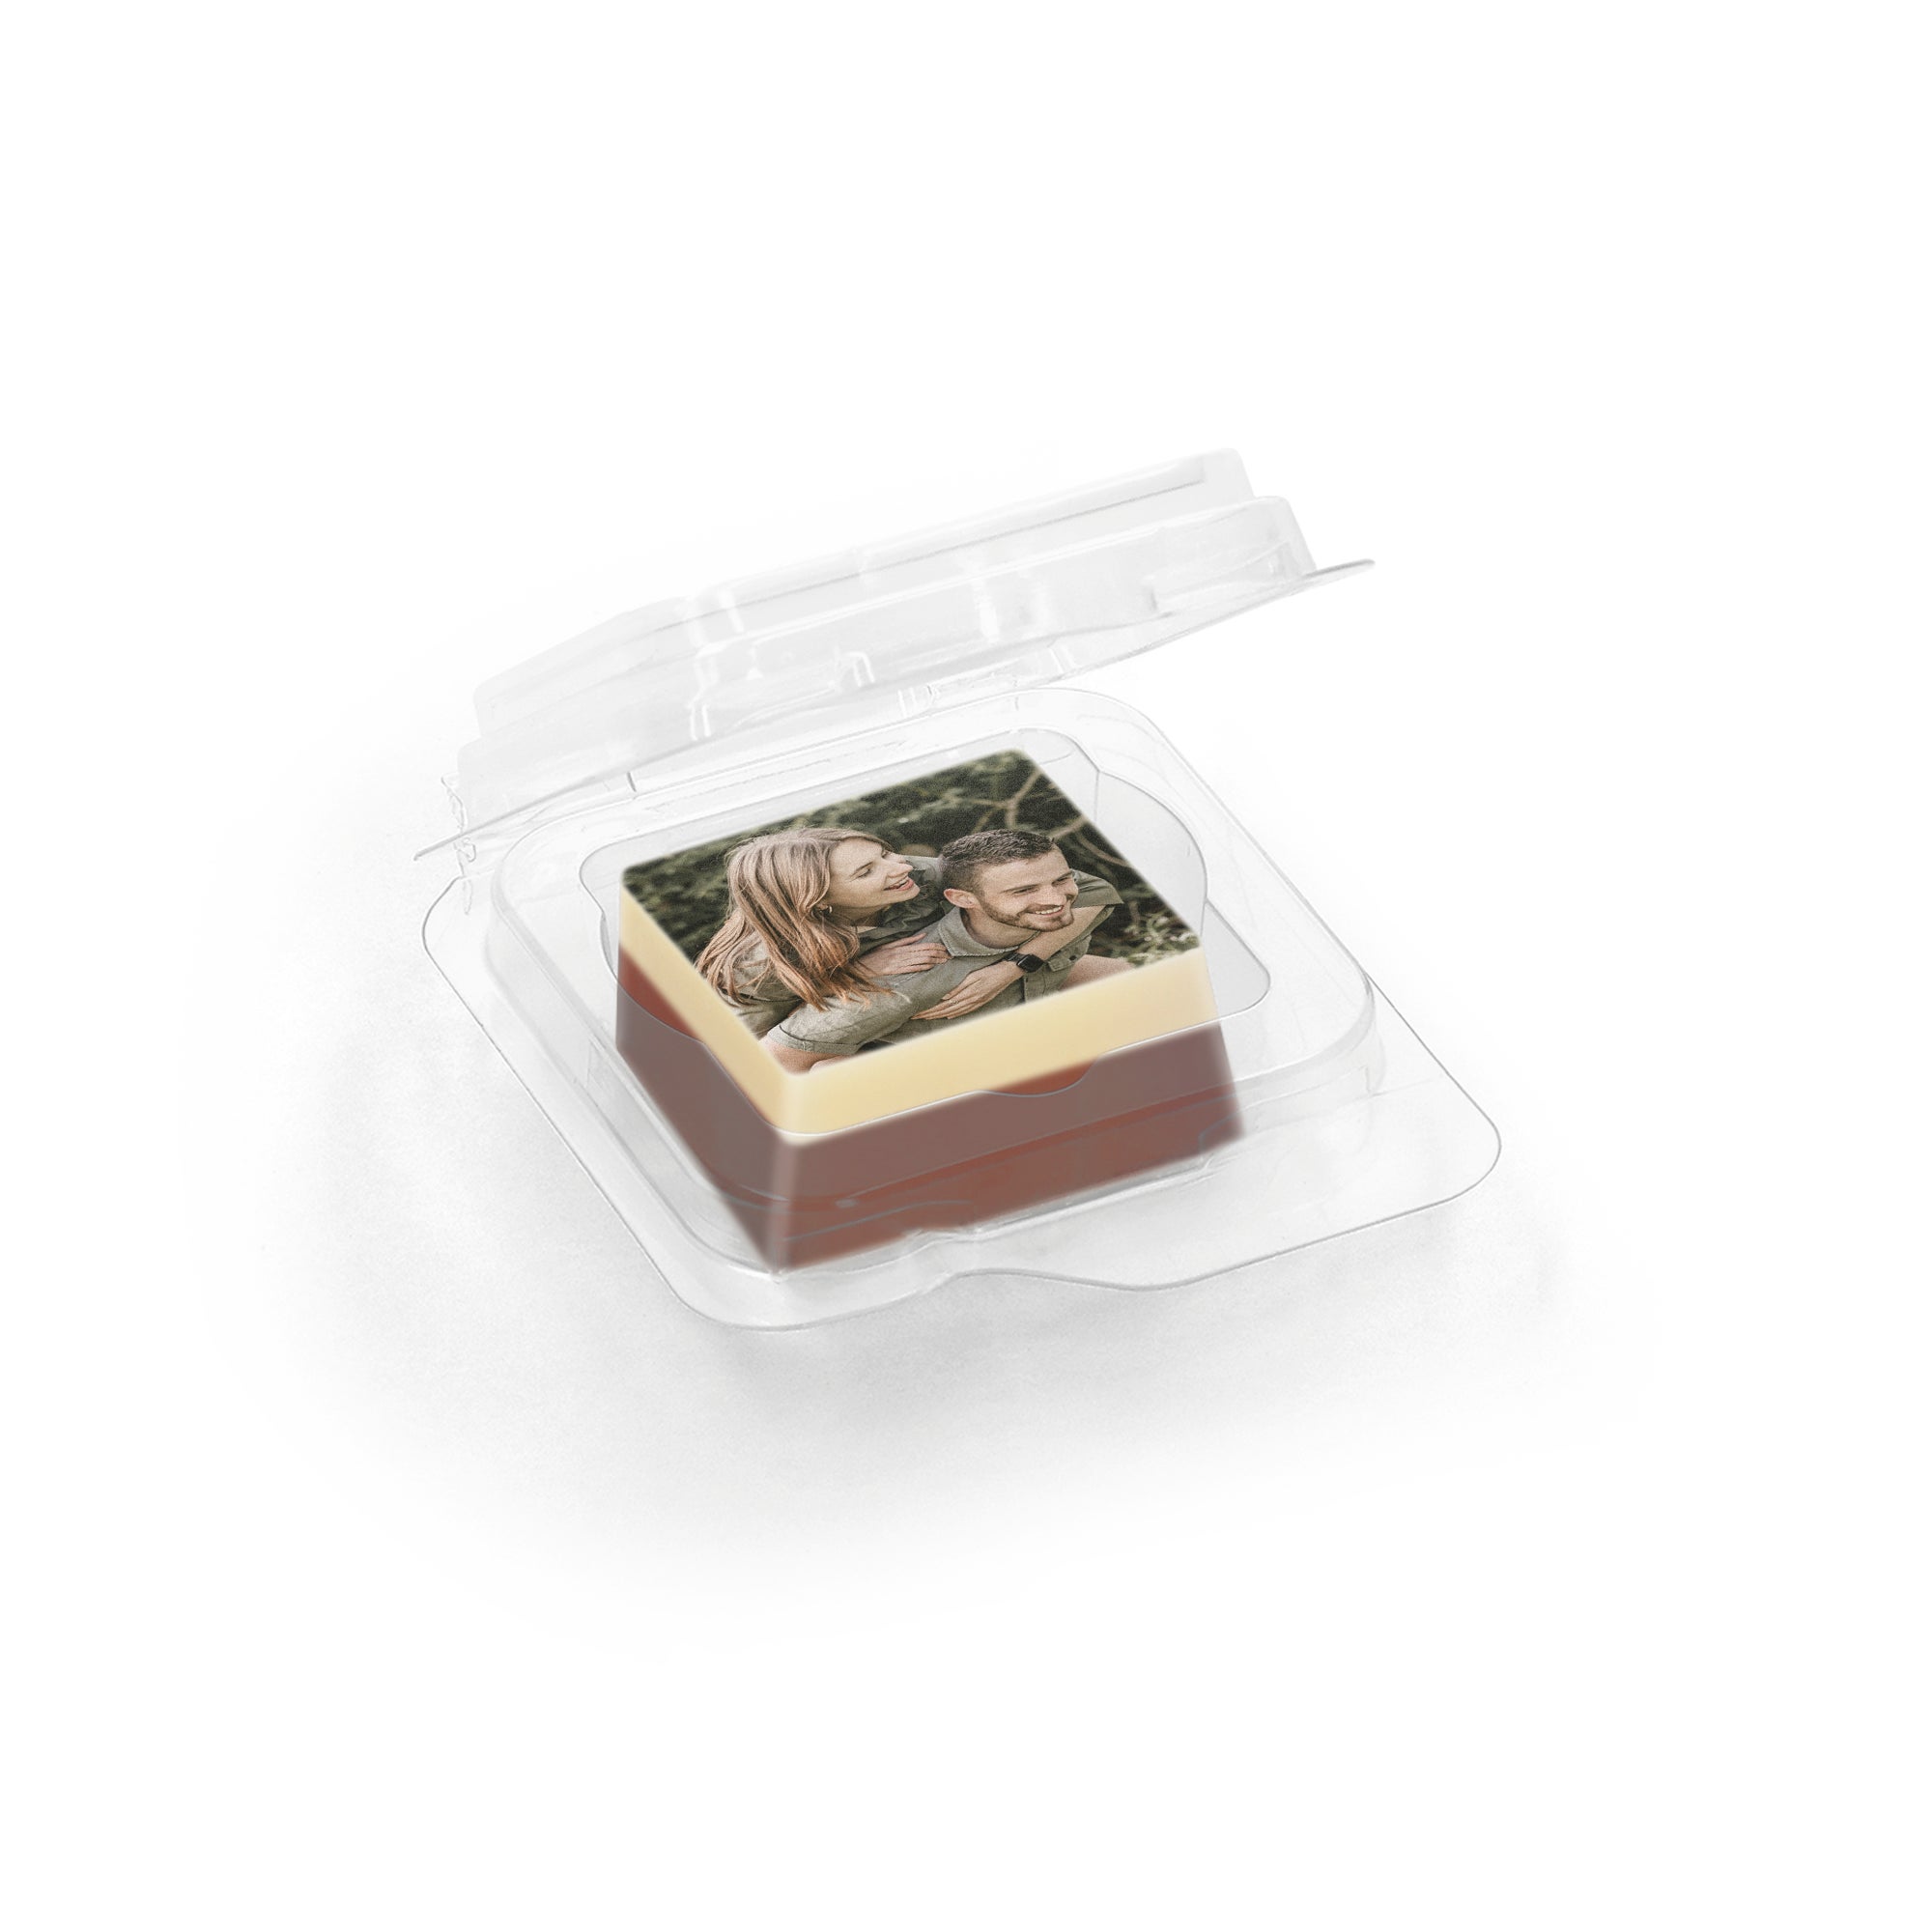 Personalised chocolates - Individually wrapped - Solid - 50 pcs - Square